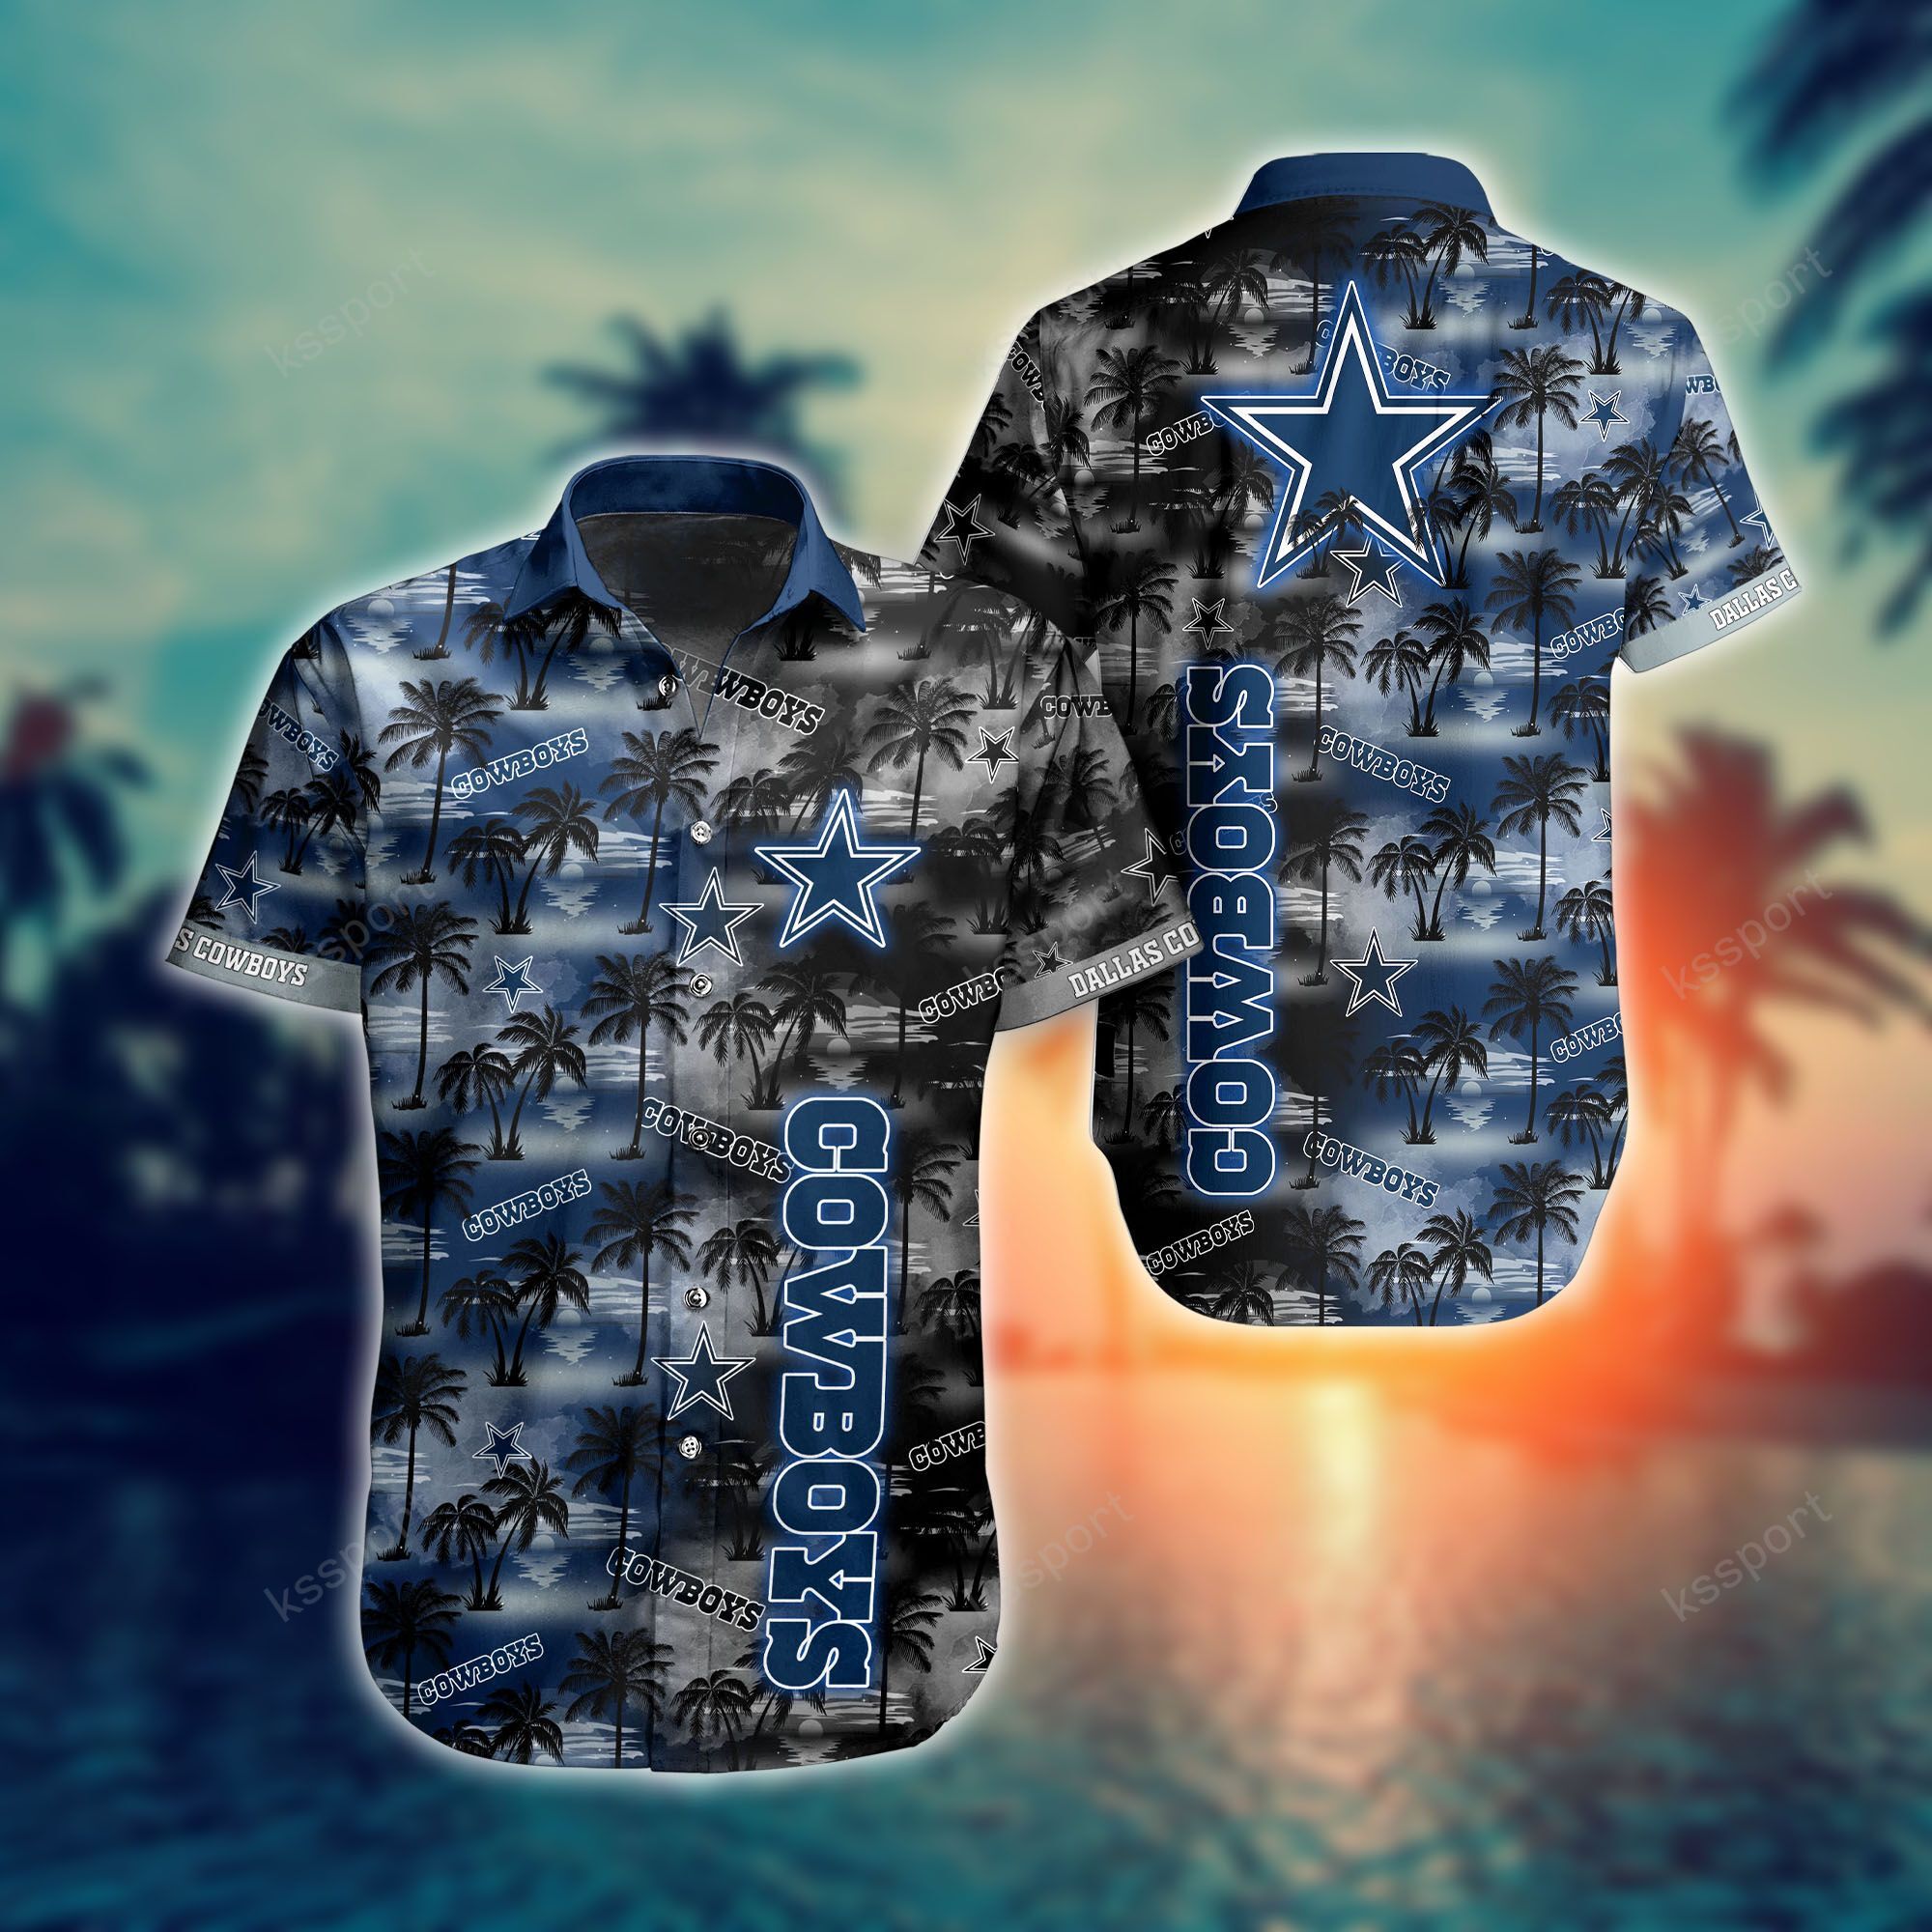 Treat yourself to a cool Hawaiian set today! 103